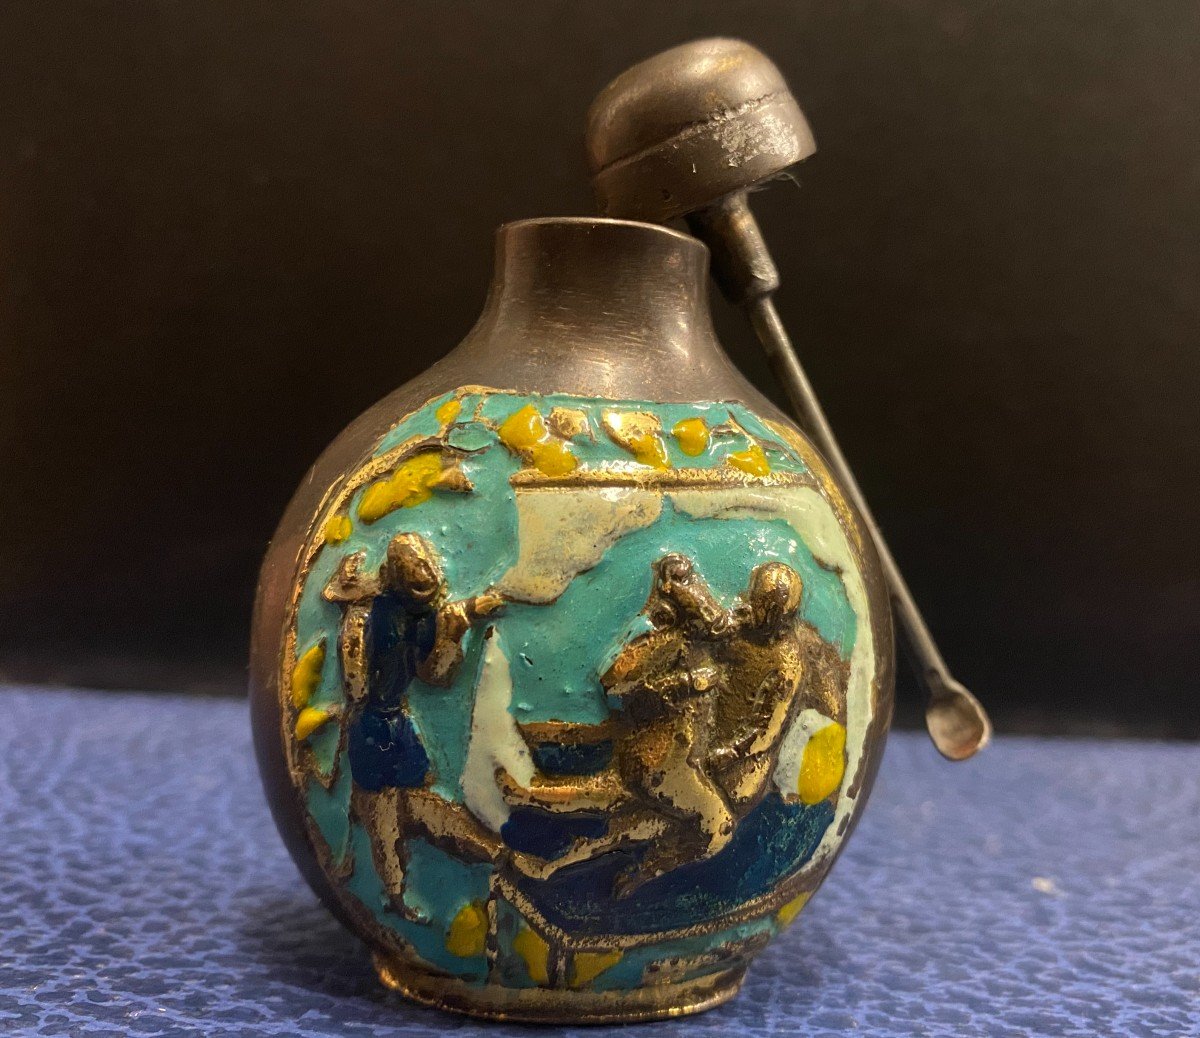 China/japan - Opium Snuffbox In Brass With Enameled Decorations Of Erotic Scenes - XXth Century-photo-6